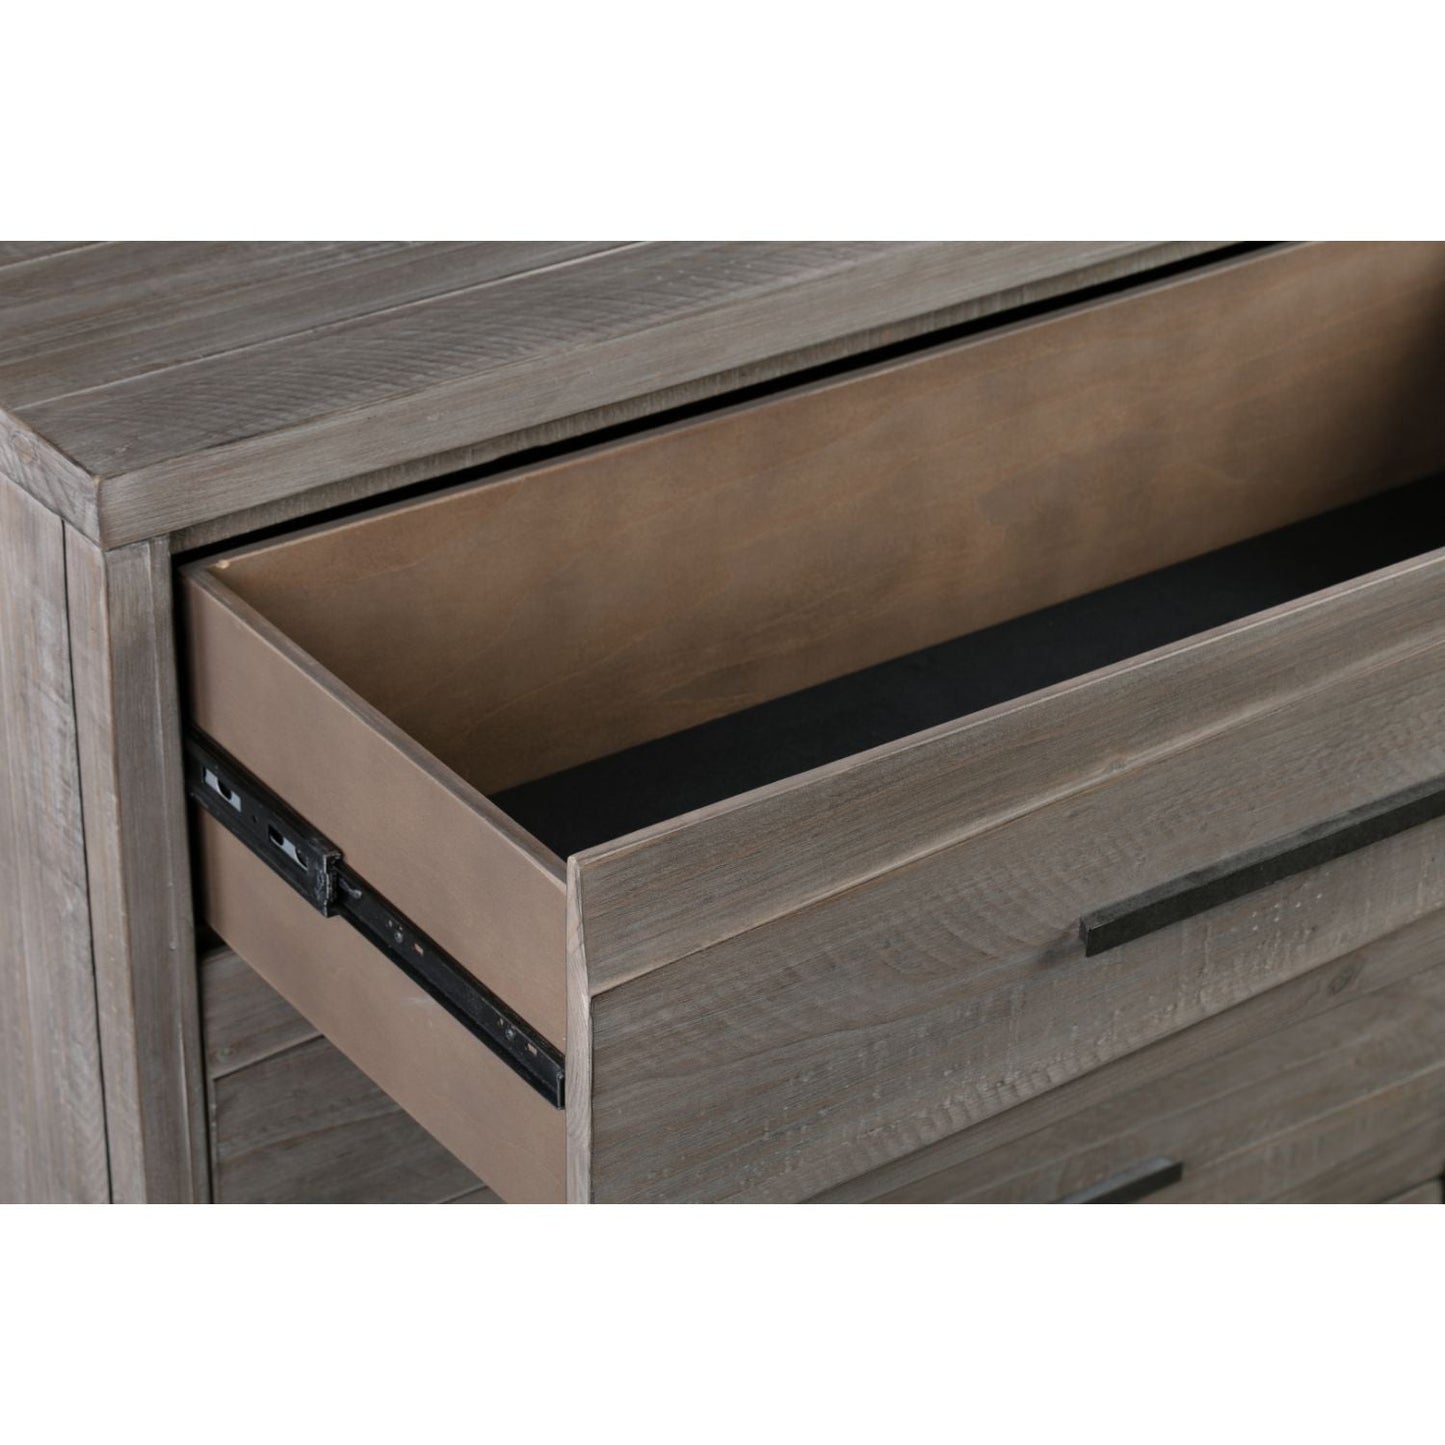 Modus Hearst Solid Wood Five Drawer Chest in Sahara Tan